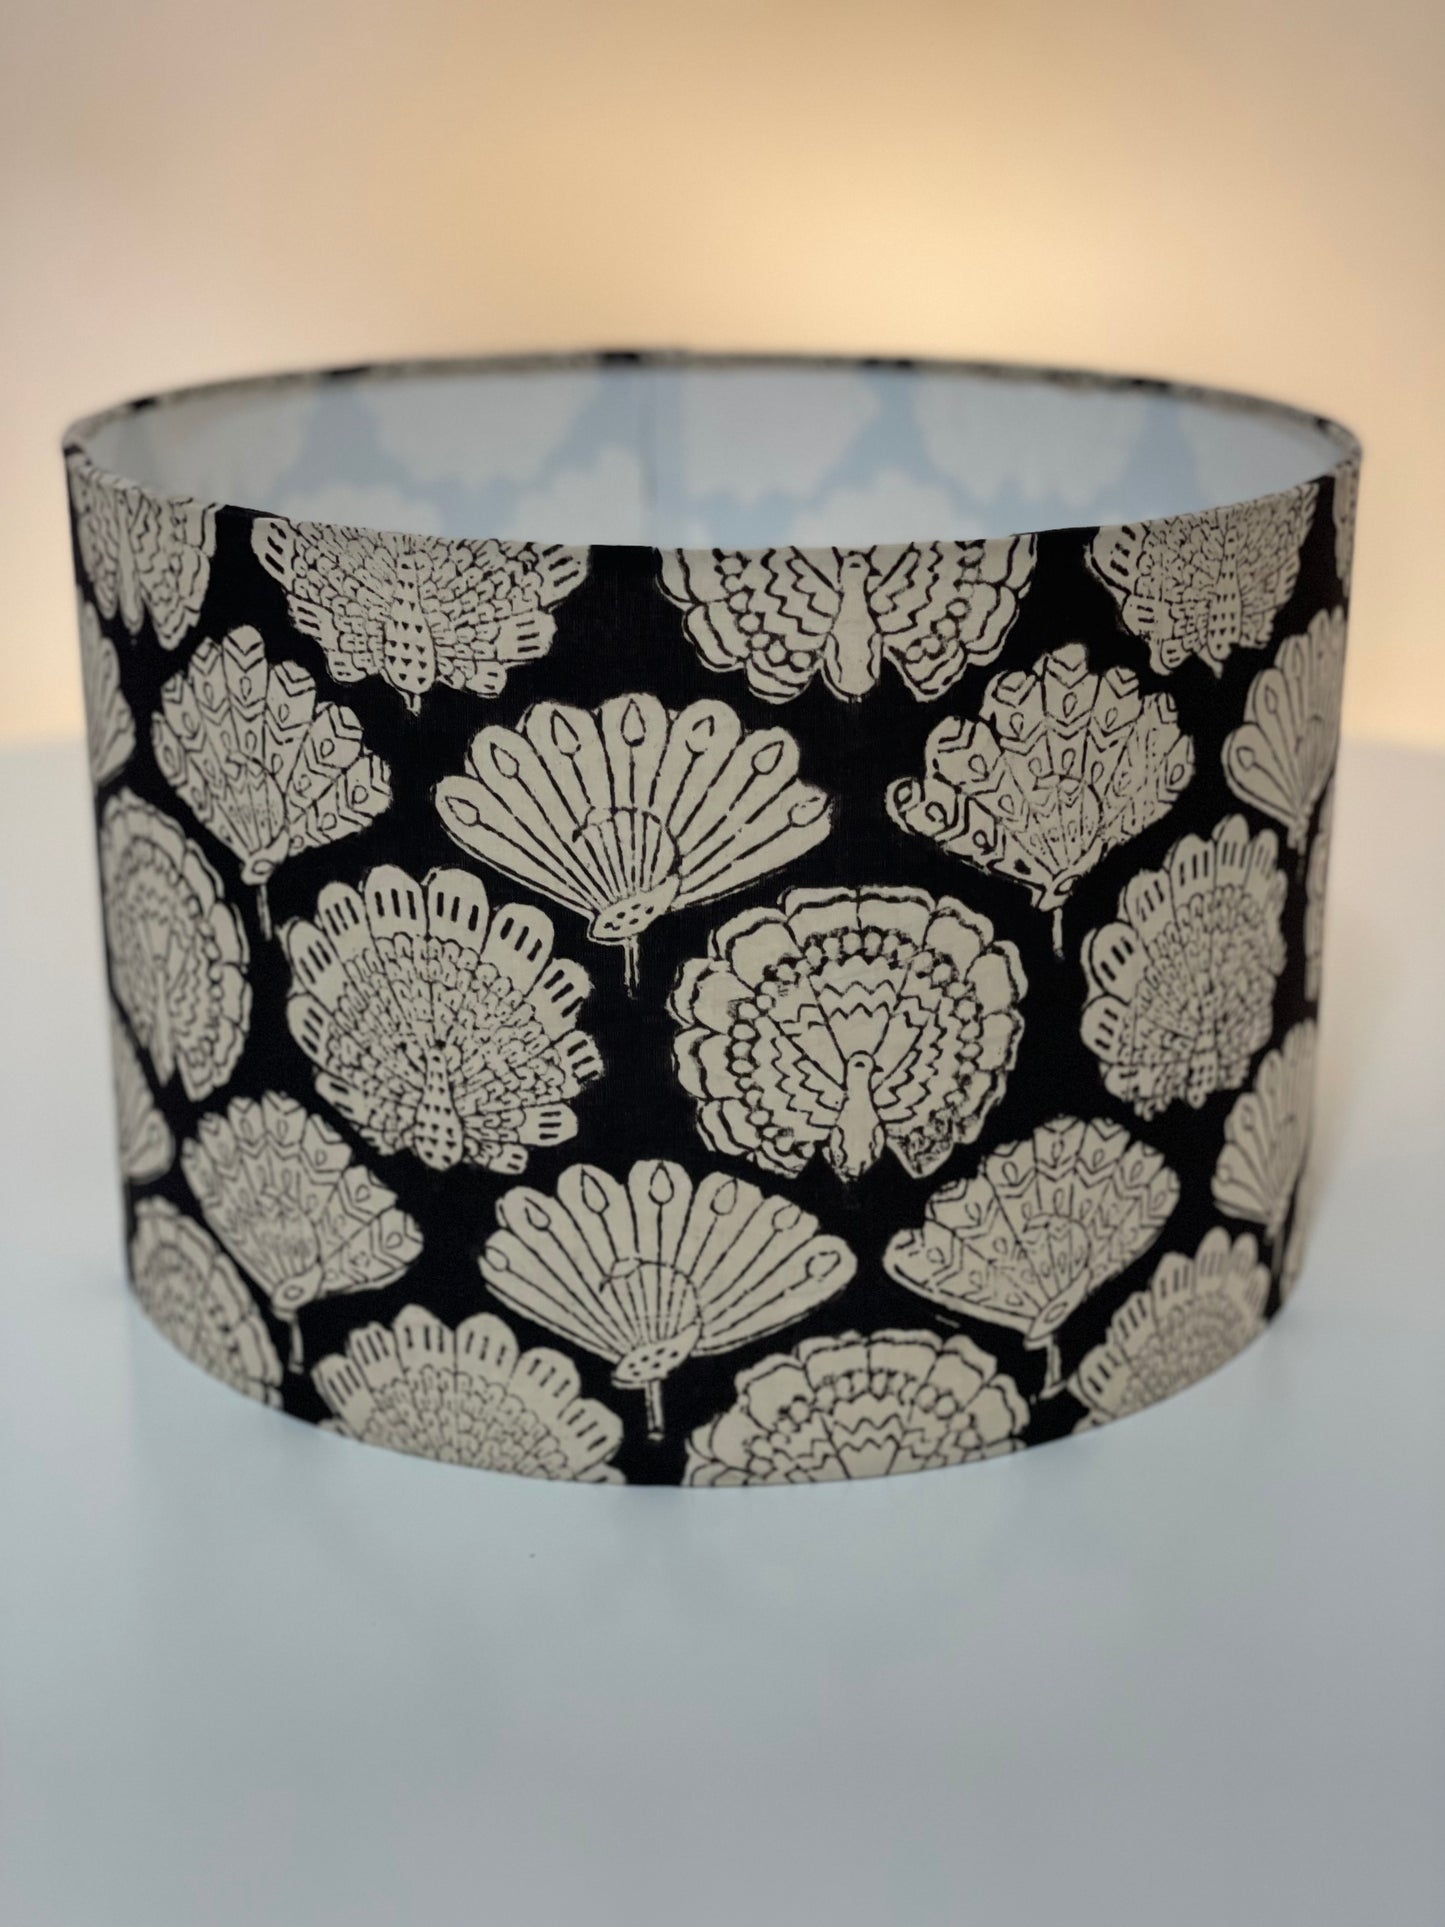 12 Inch Drum Lampshade. Indian Hand Block Print. Black with Ivory Peacock Motif.